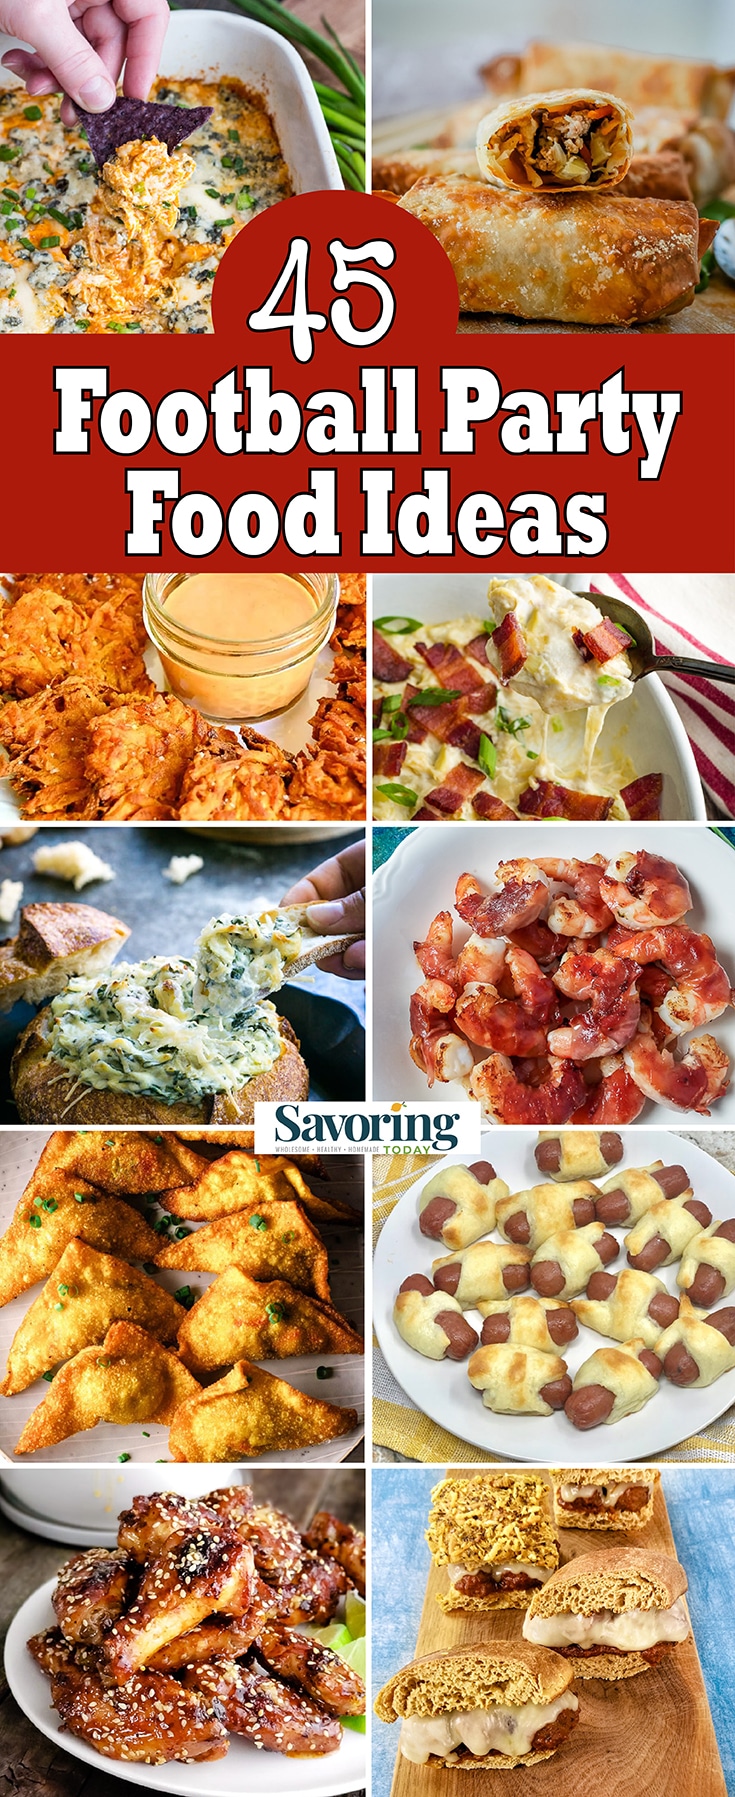 Football Party Food Roundup: 45 Unique Recipe Ideas for the Big Game